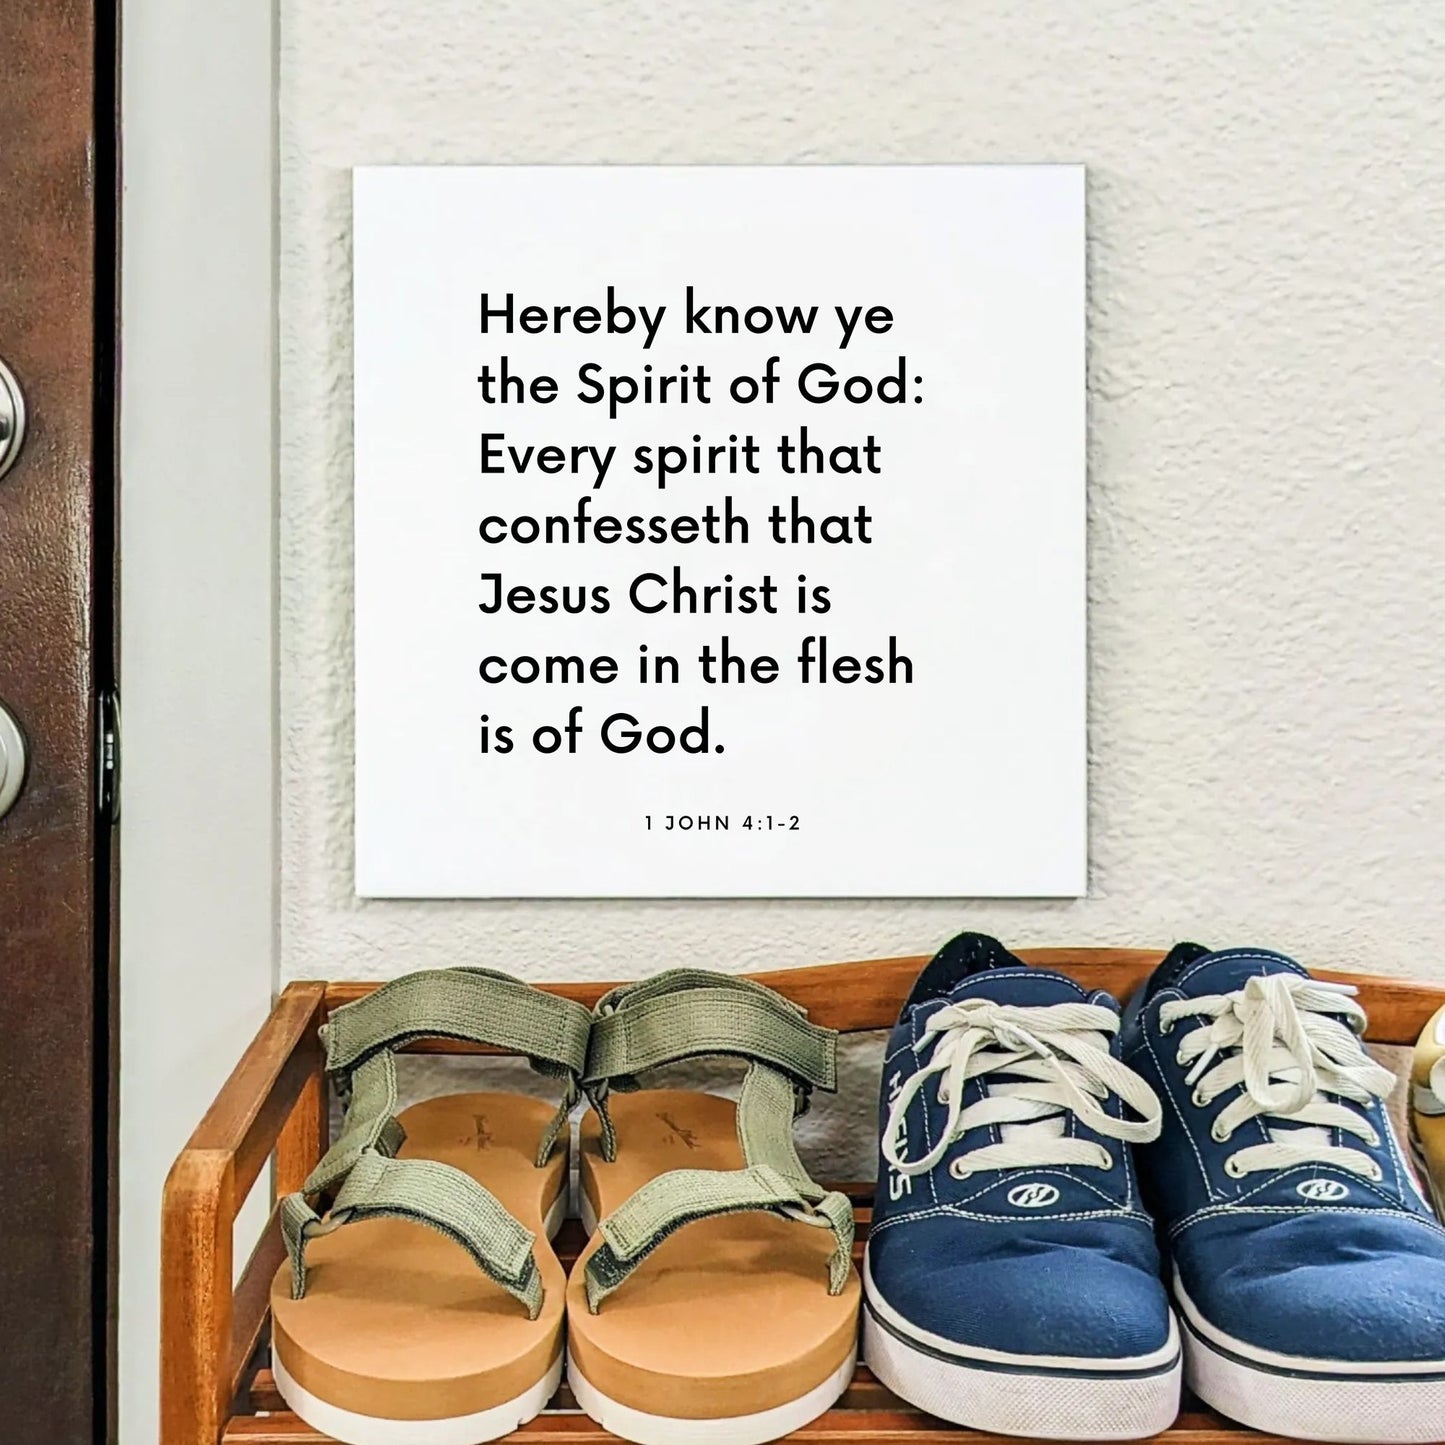 Shoes mouting of the scripture tile for 1 John 4:1-2 - "Every spirit that confesseth that Jesus Christ is come"